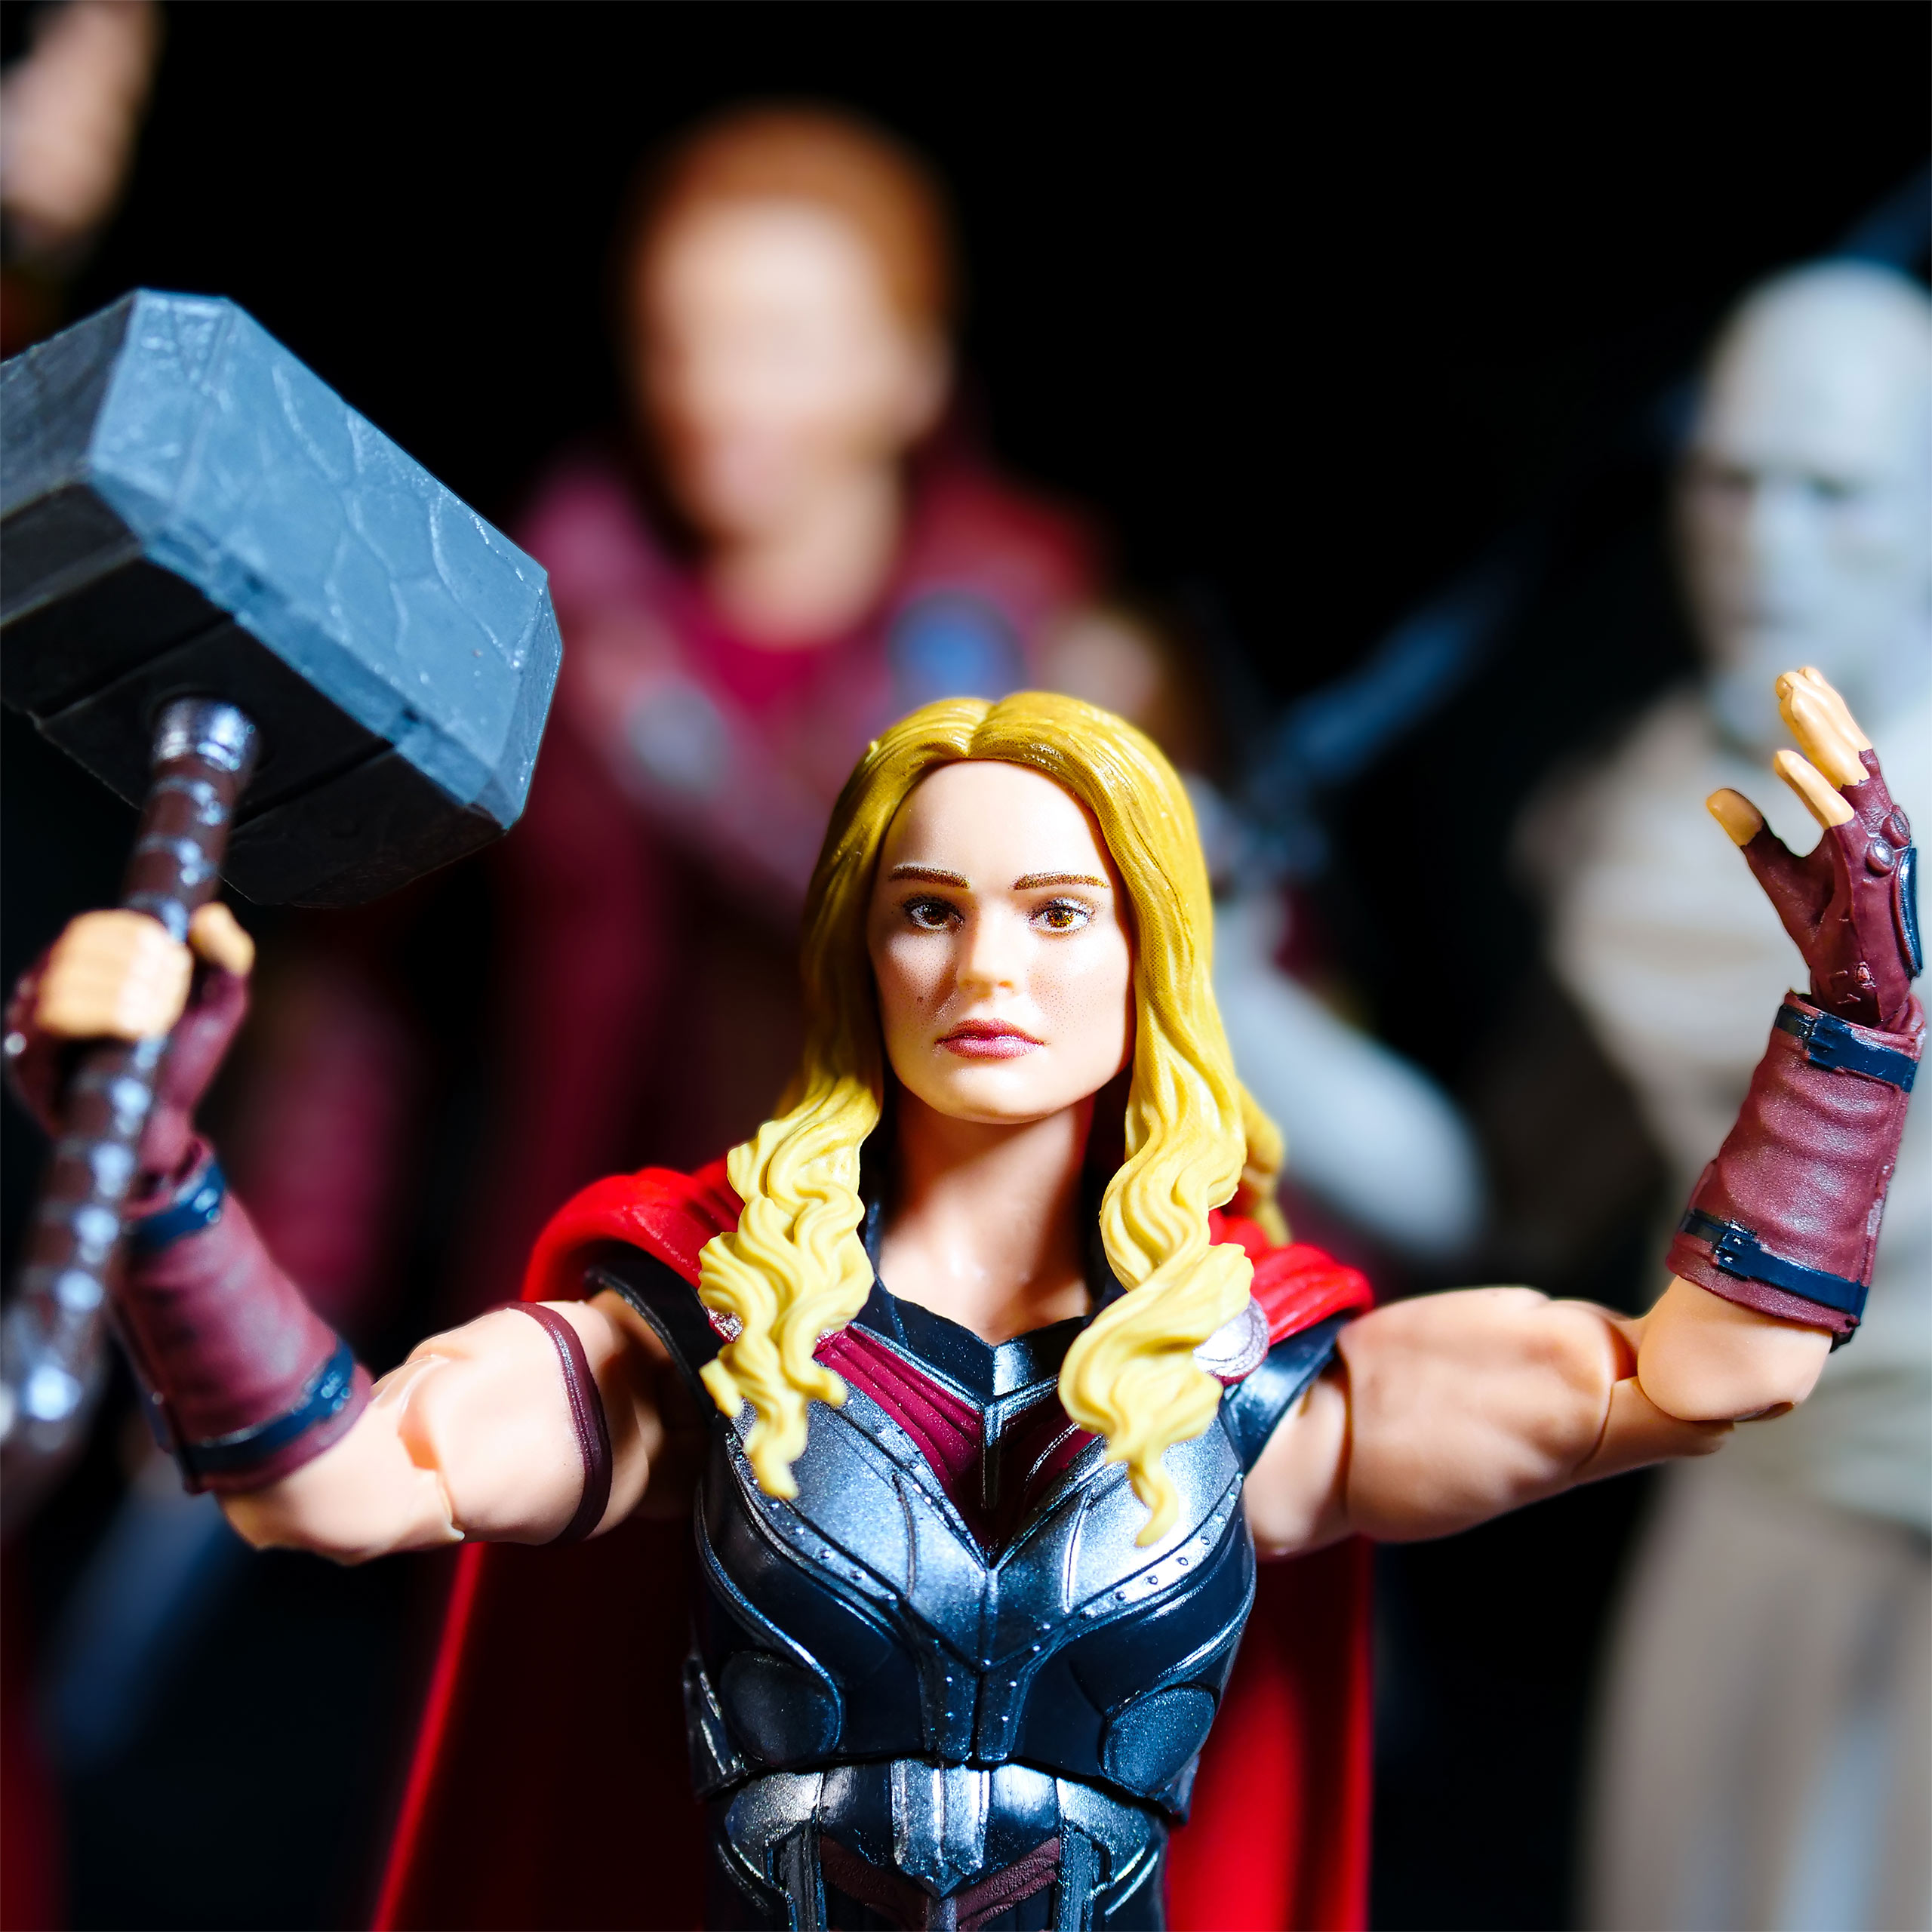 Thor: Love and Thunder - Mighty Thor Actionfigur